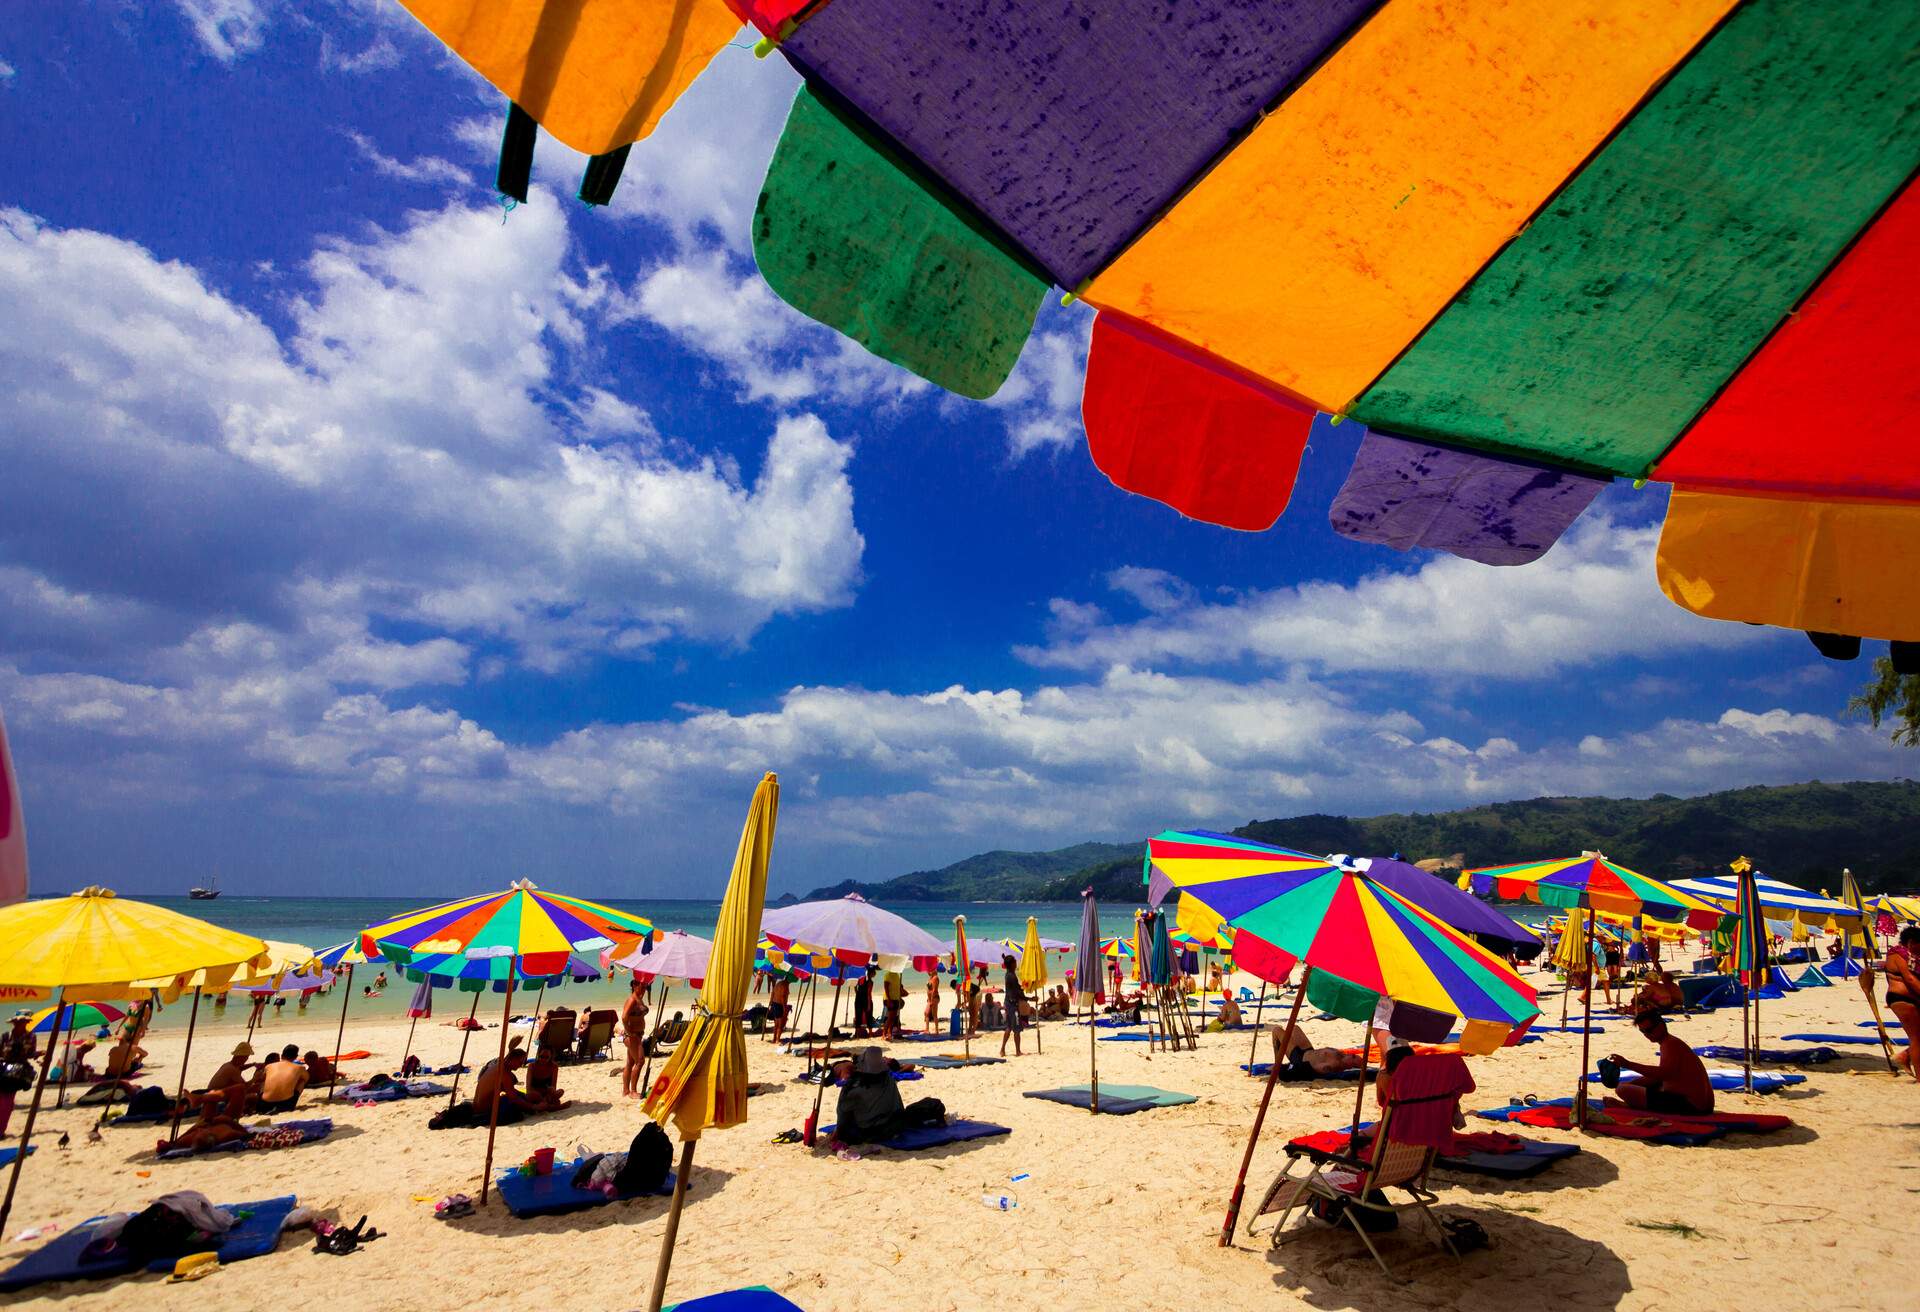 A busy beach full of people with colourful sunbeds and parasols overlooking the sea against the cloudy blue sky.